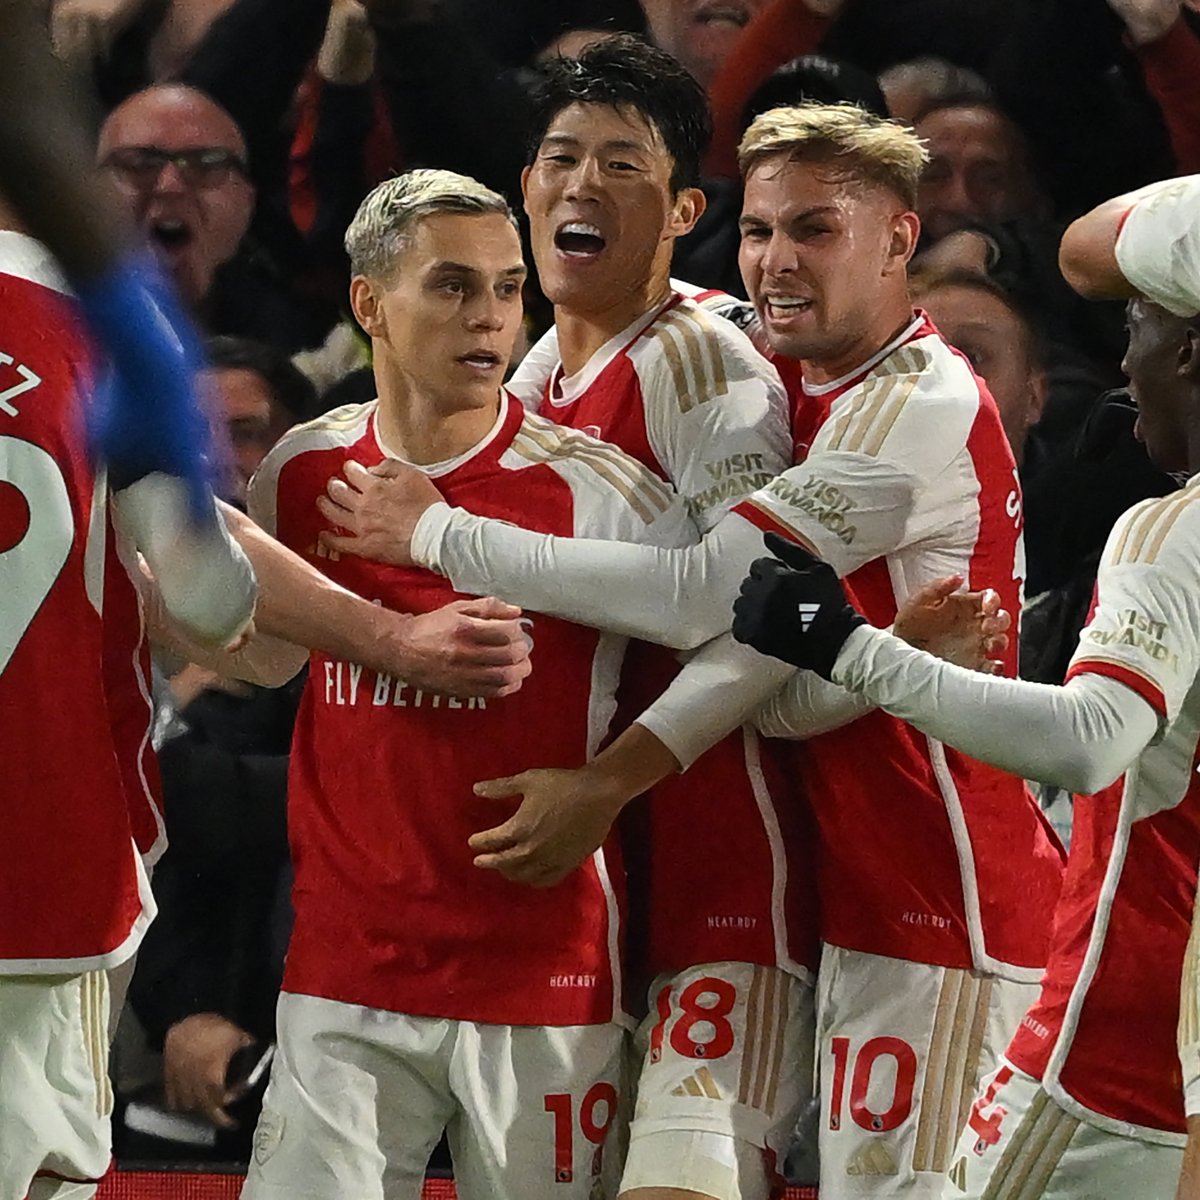 .Arsenal stung Chelsea with a stunning late fightback as they came from two goals down to snatch a 2-2 draw at Stamford Bridge. #Arsenal maintain their unbeaten start to the season. @ChelseaFC 🔵 2-2 @Arsenal 🔴 #WhiteBearNews #CHEARS #ChelseaFC